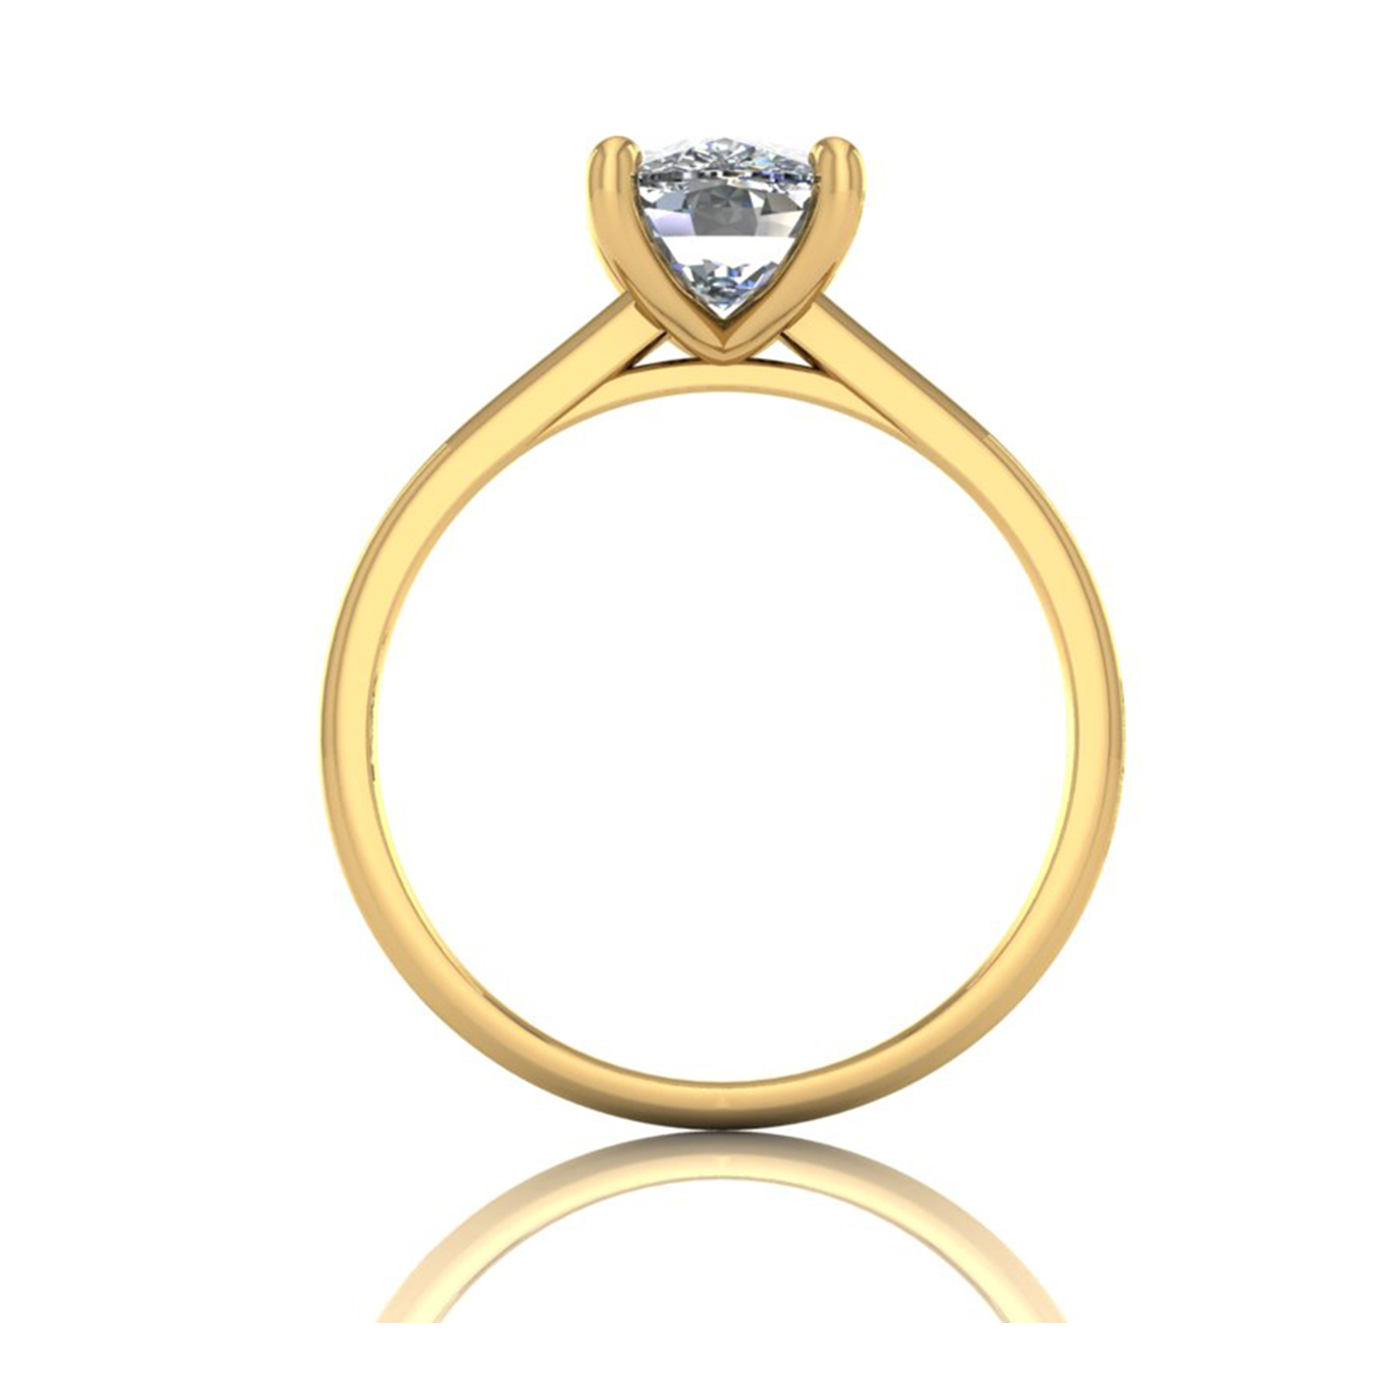 18k yellow gold  2.50 ct 4 prongs solitaire elongated cushion cut diamond engagement ring with whisper thin band